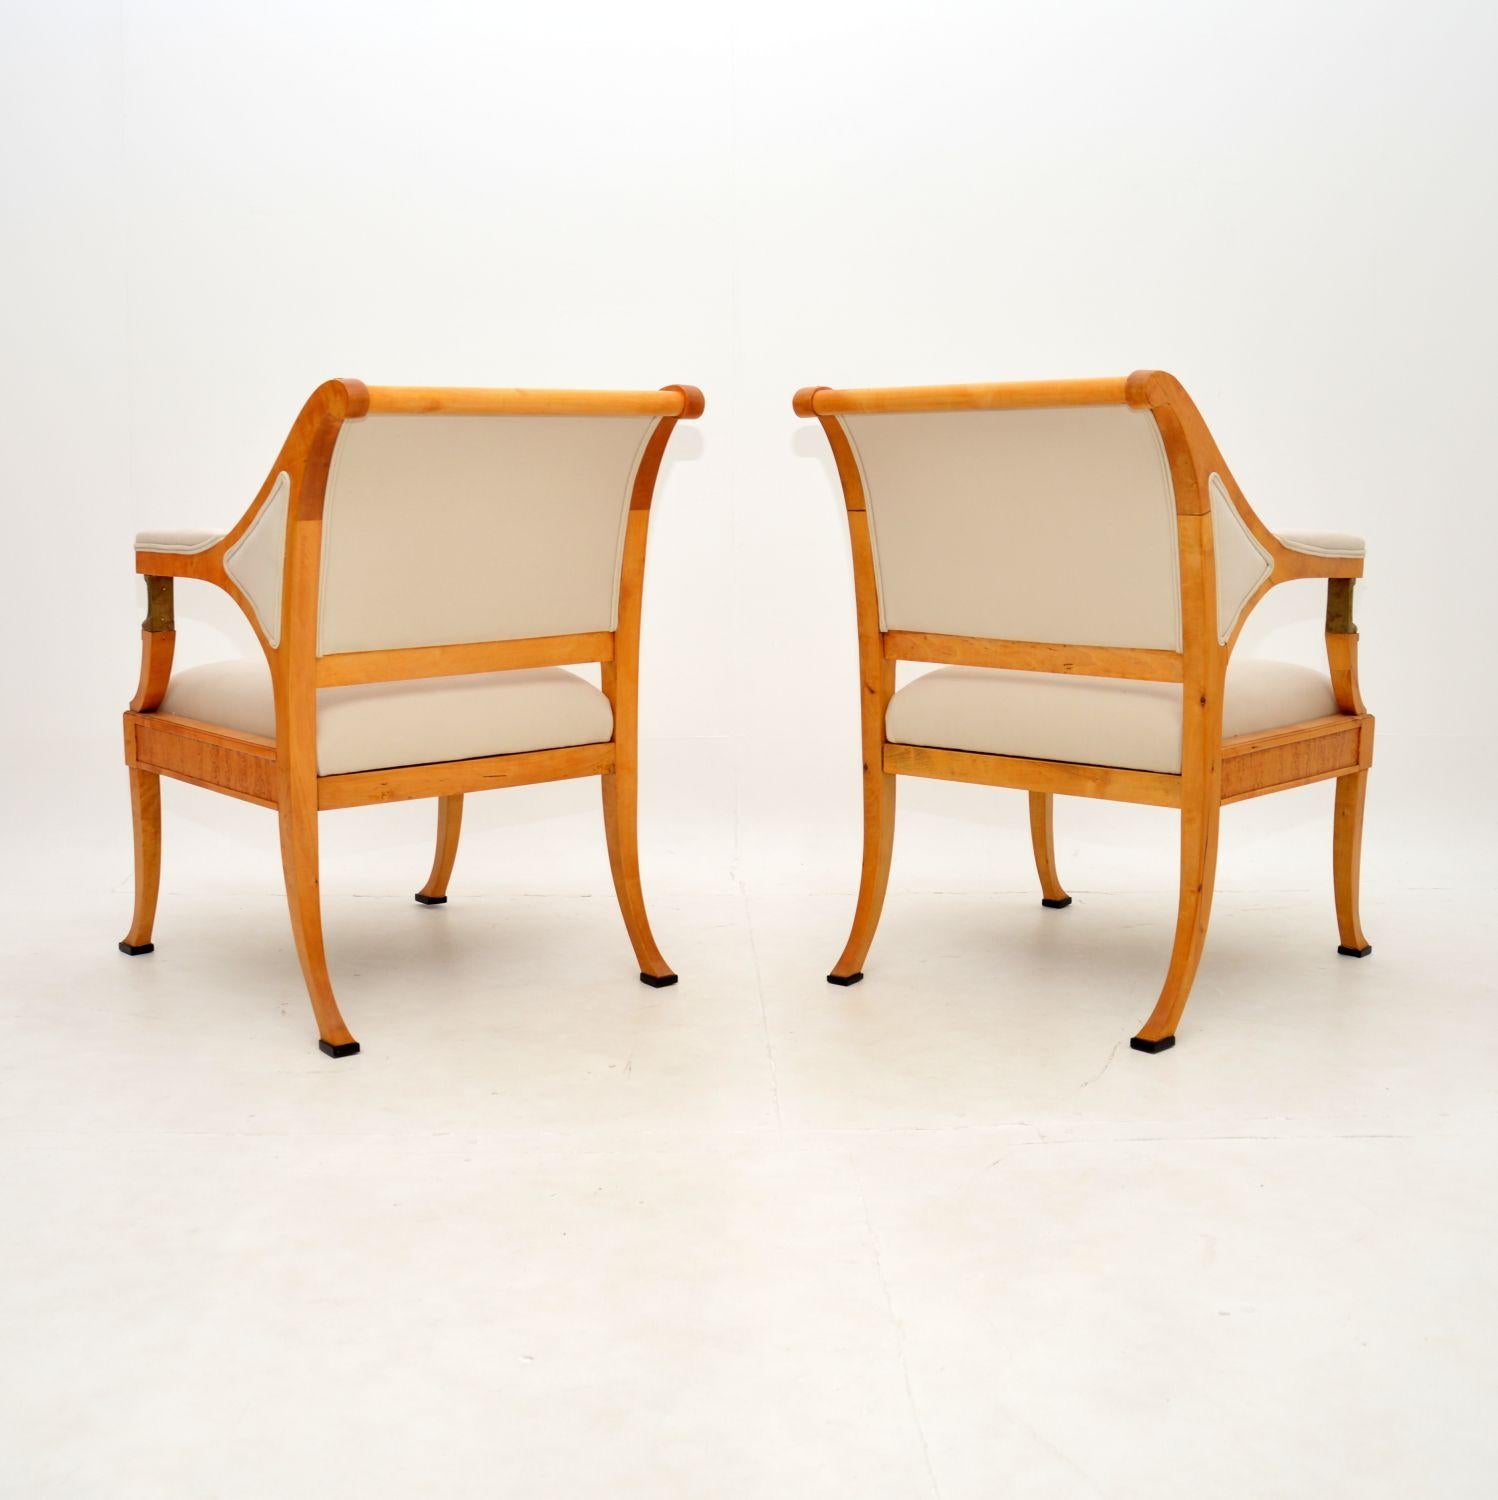 Late 19th Century Pair of Antique Swedish Neoclassical Armchairs